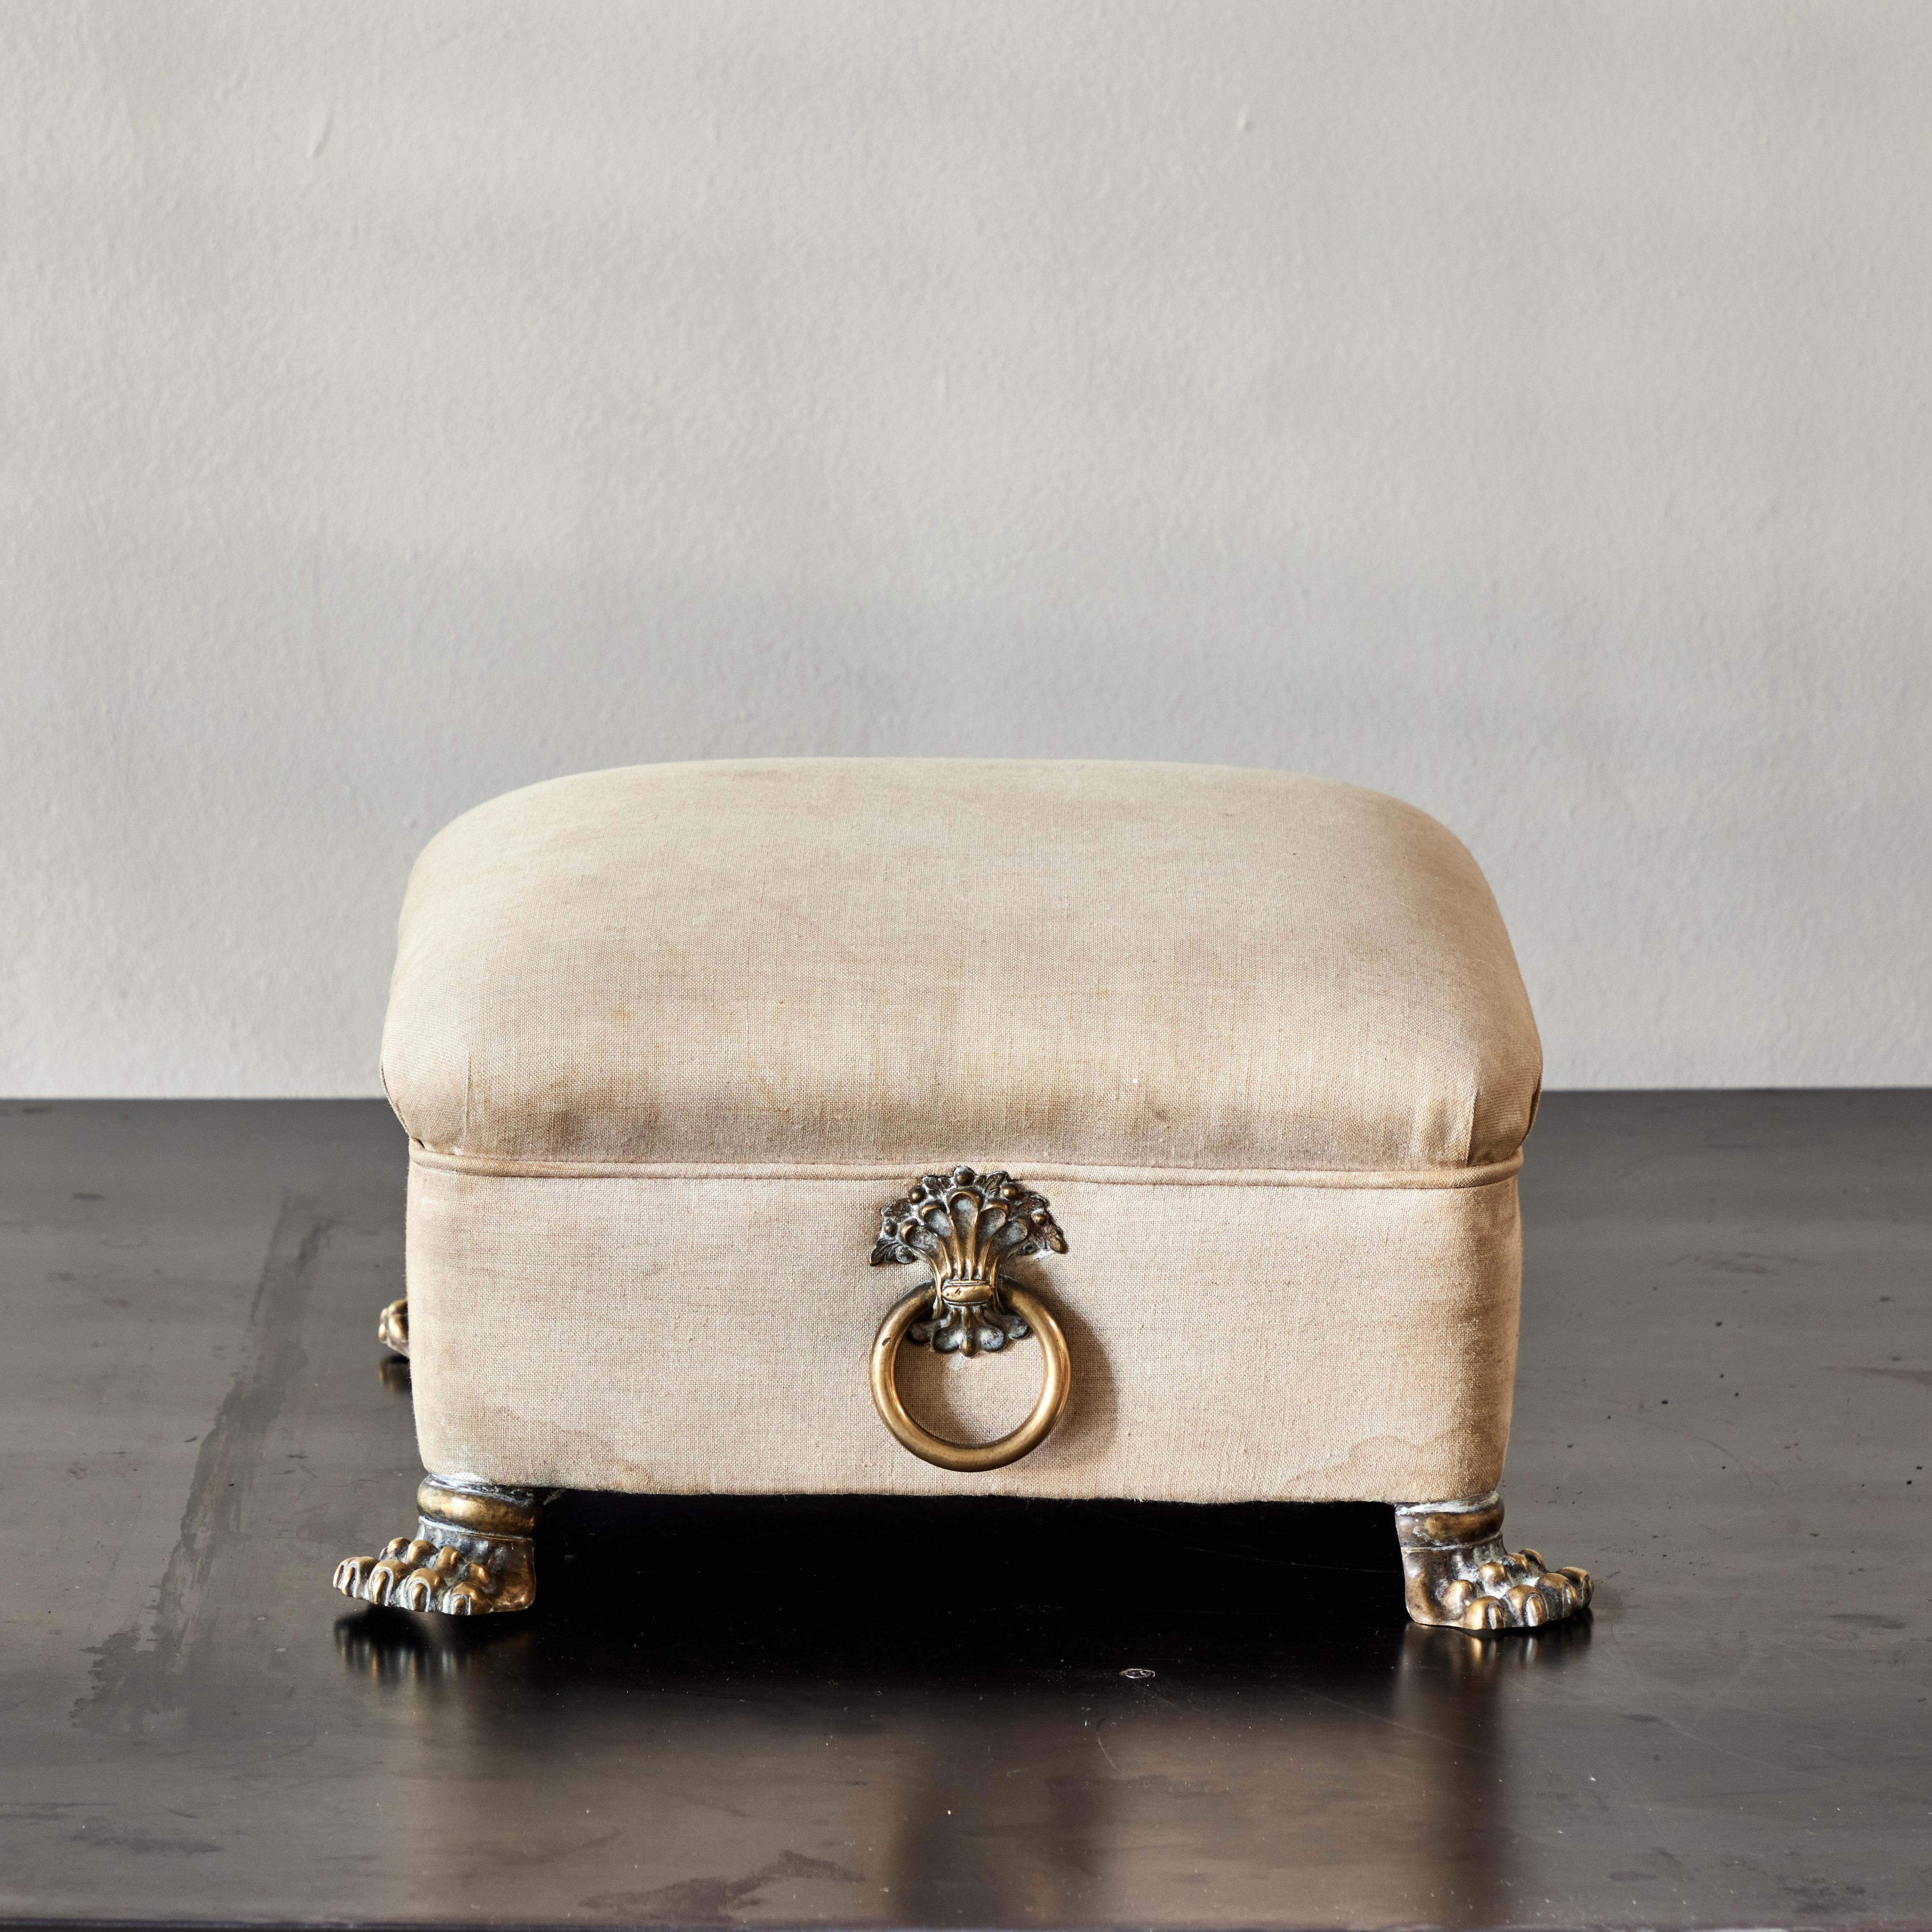 William IV era footstool with decorative brass claw feet and handle rings, upholstered in cream-colored linen. A uniquely charming addition to any seating arrangement. 

England, circa 1830

Dimensions: 14W x 14D x 8H.